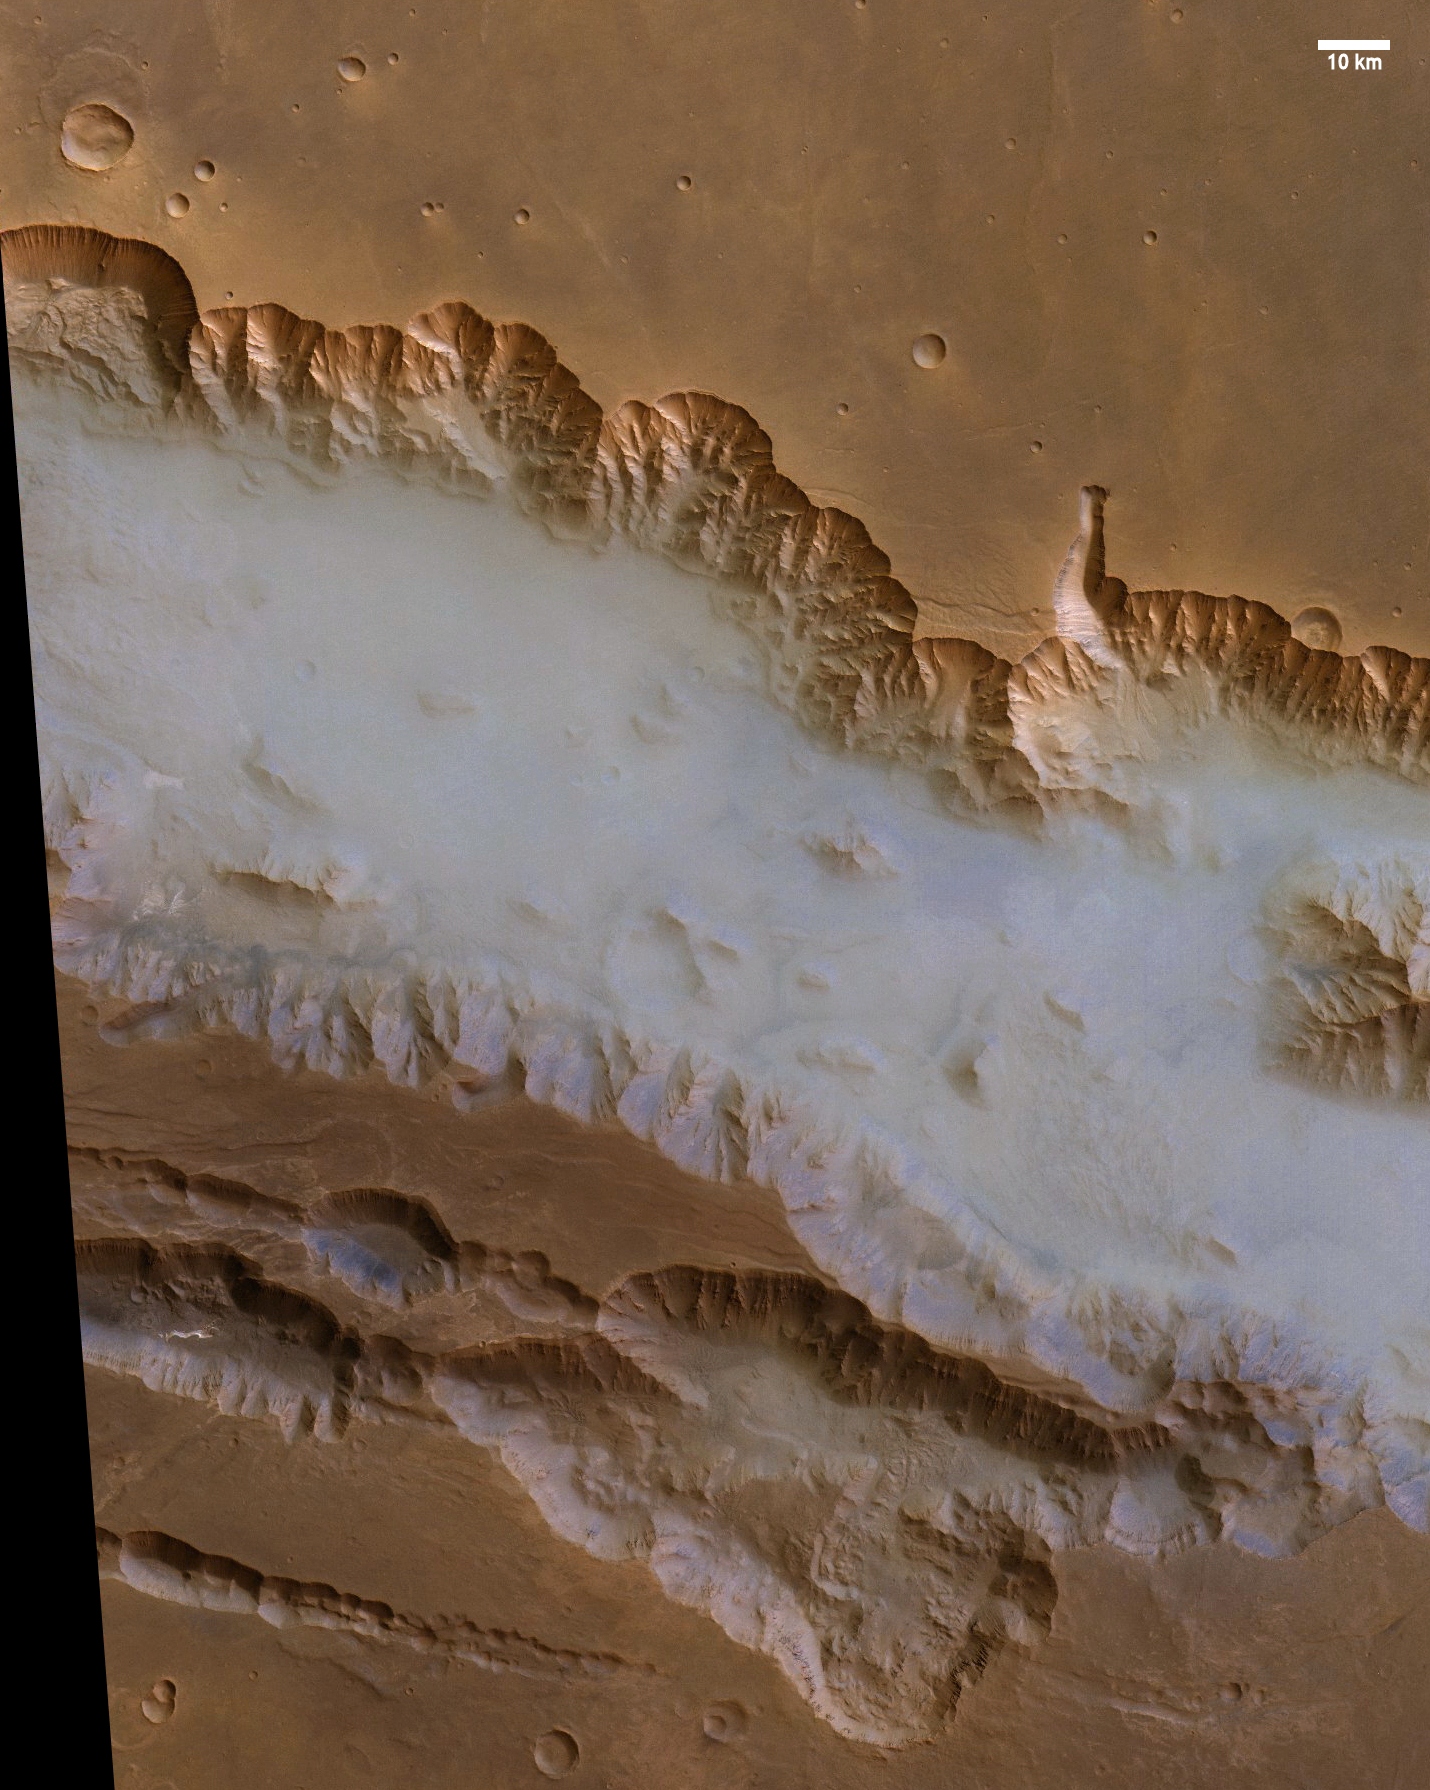 The European Space Agency's Mars Express captured this image of fog at Valles Marineris.